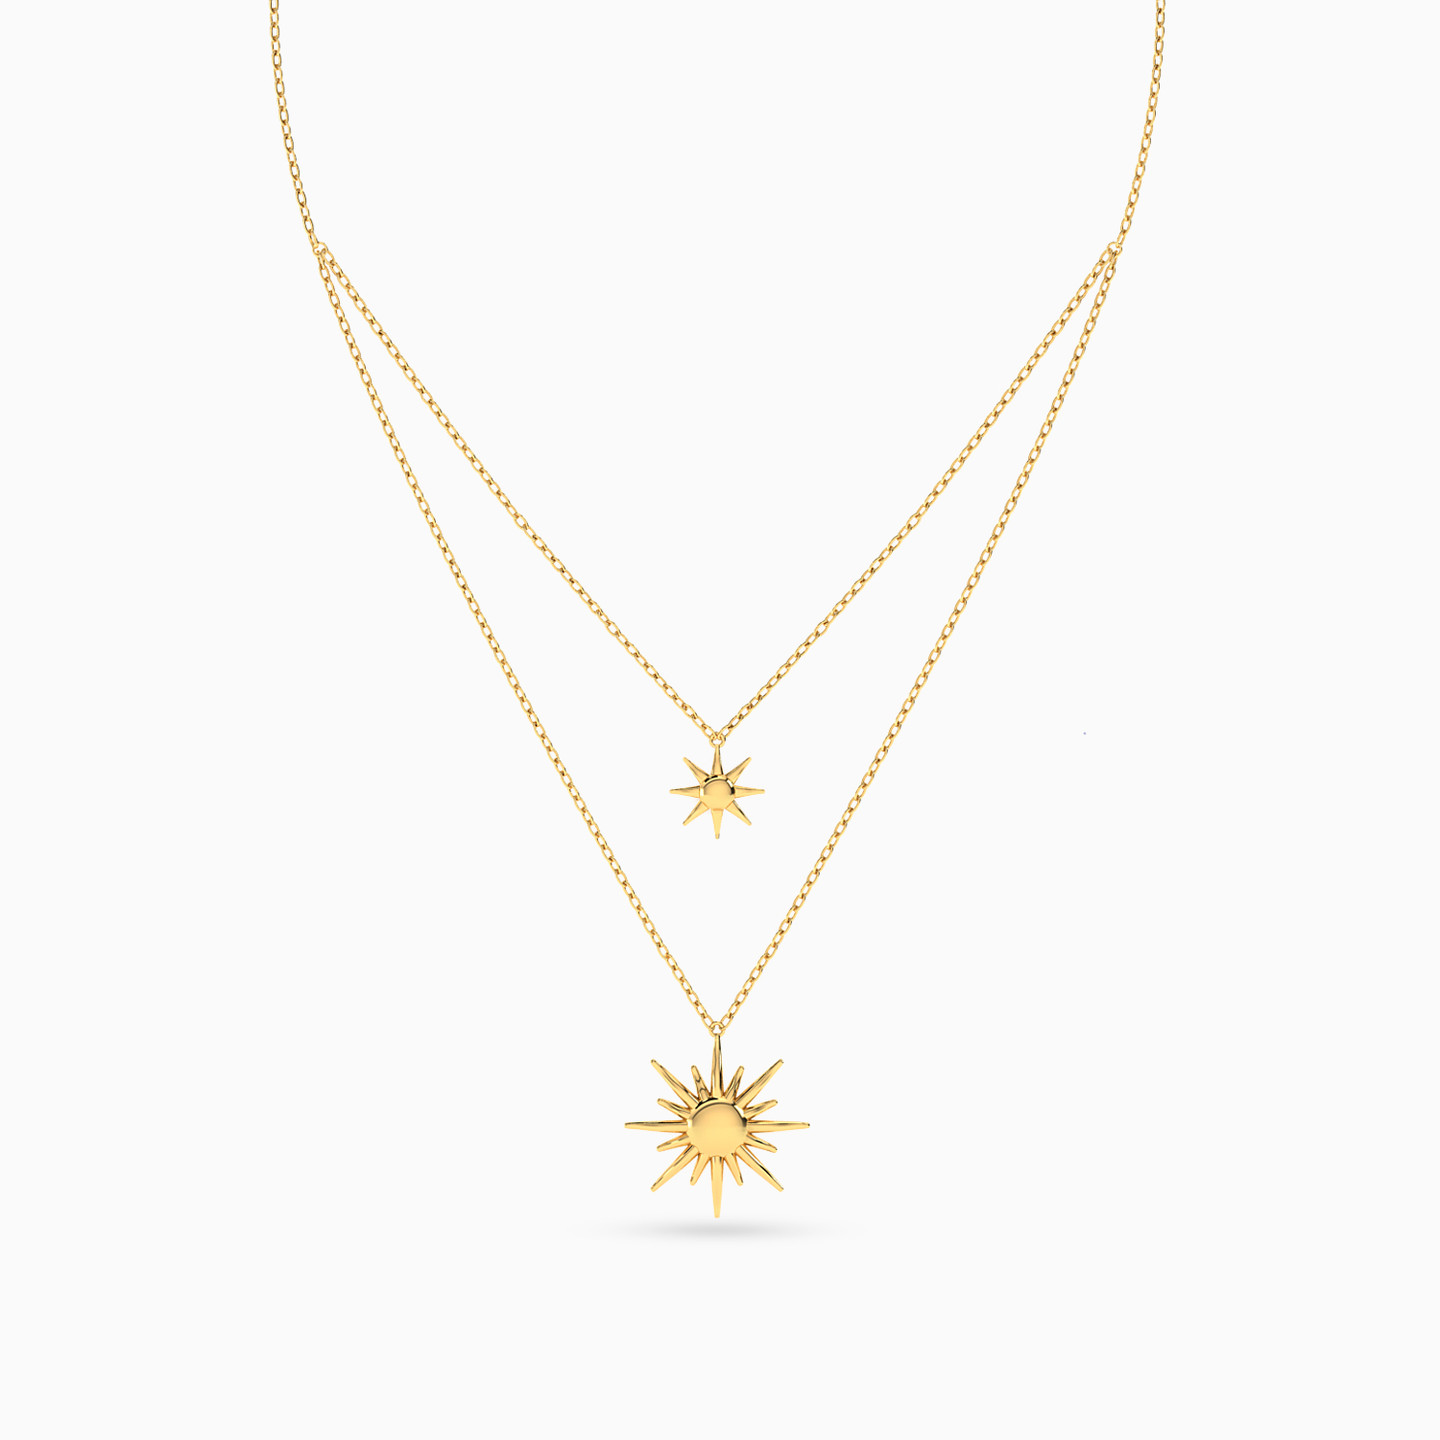 18K Gold Layered Necklace - 3